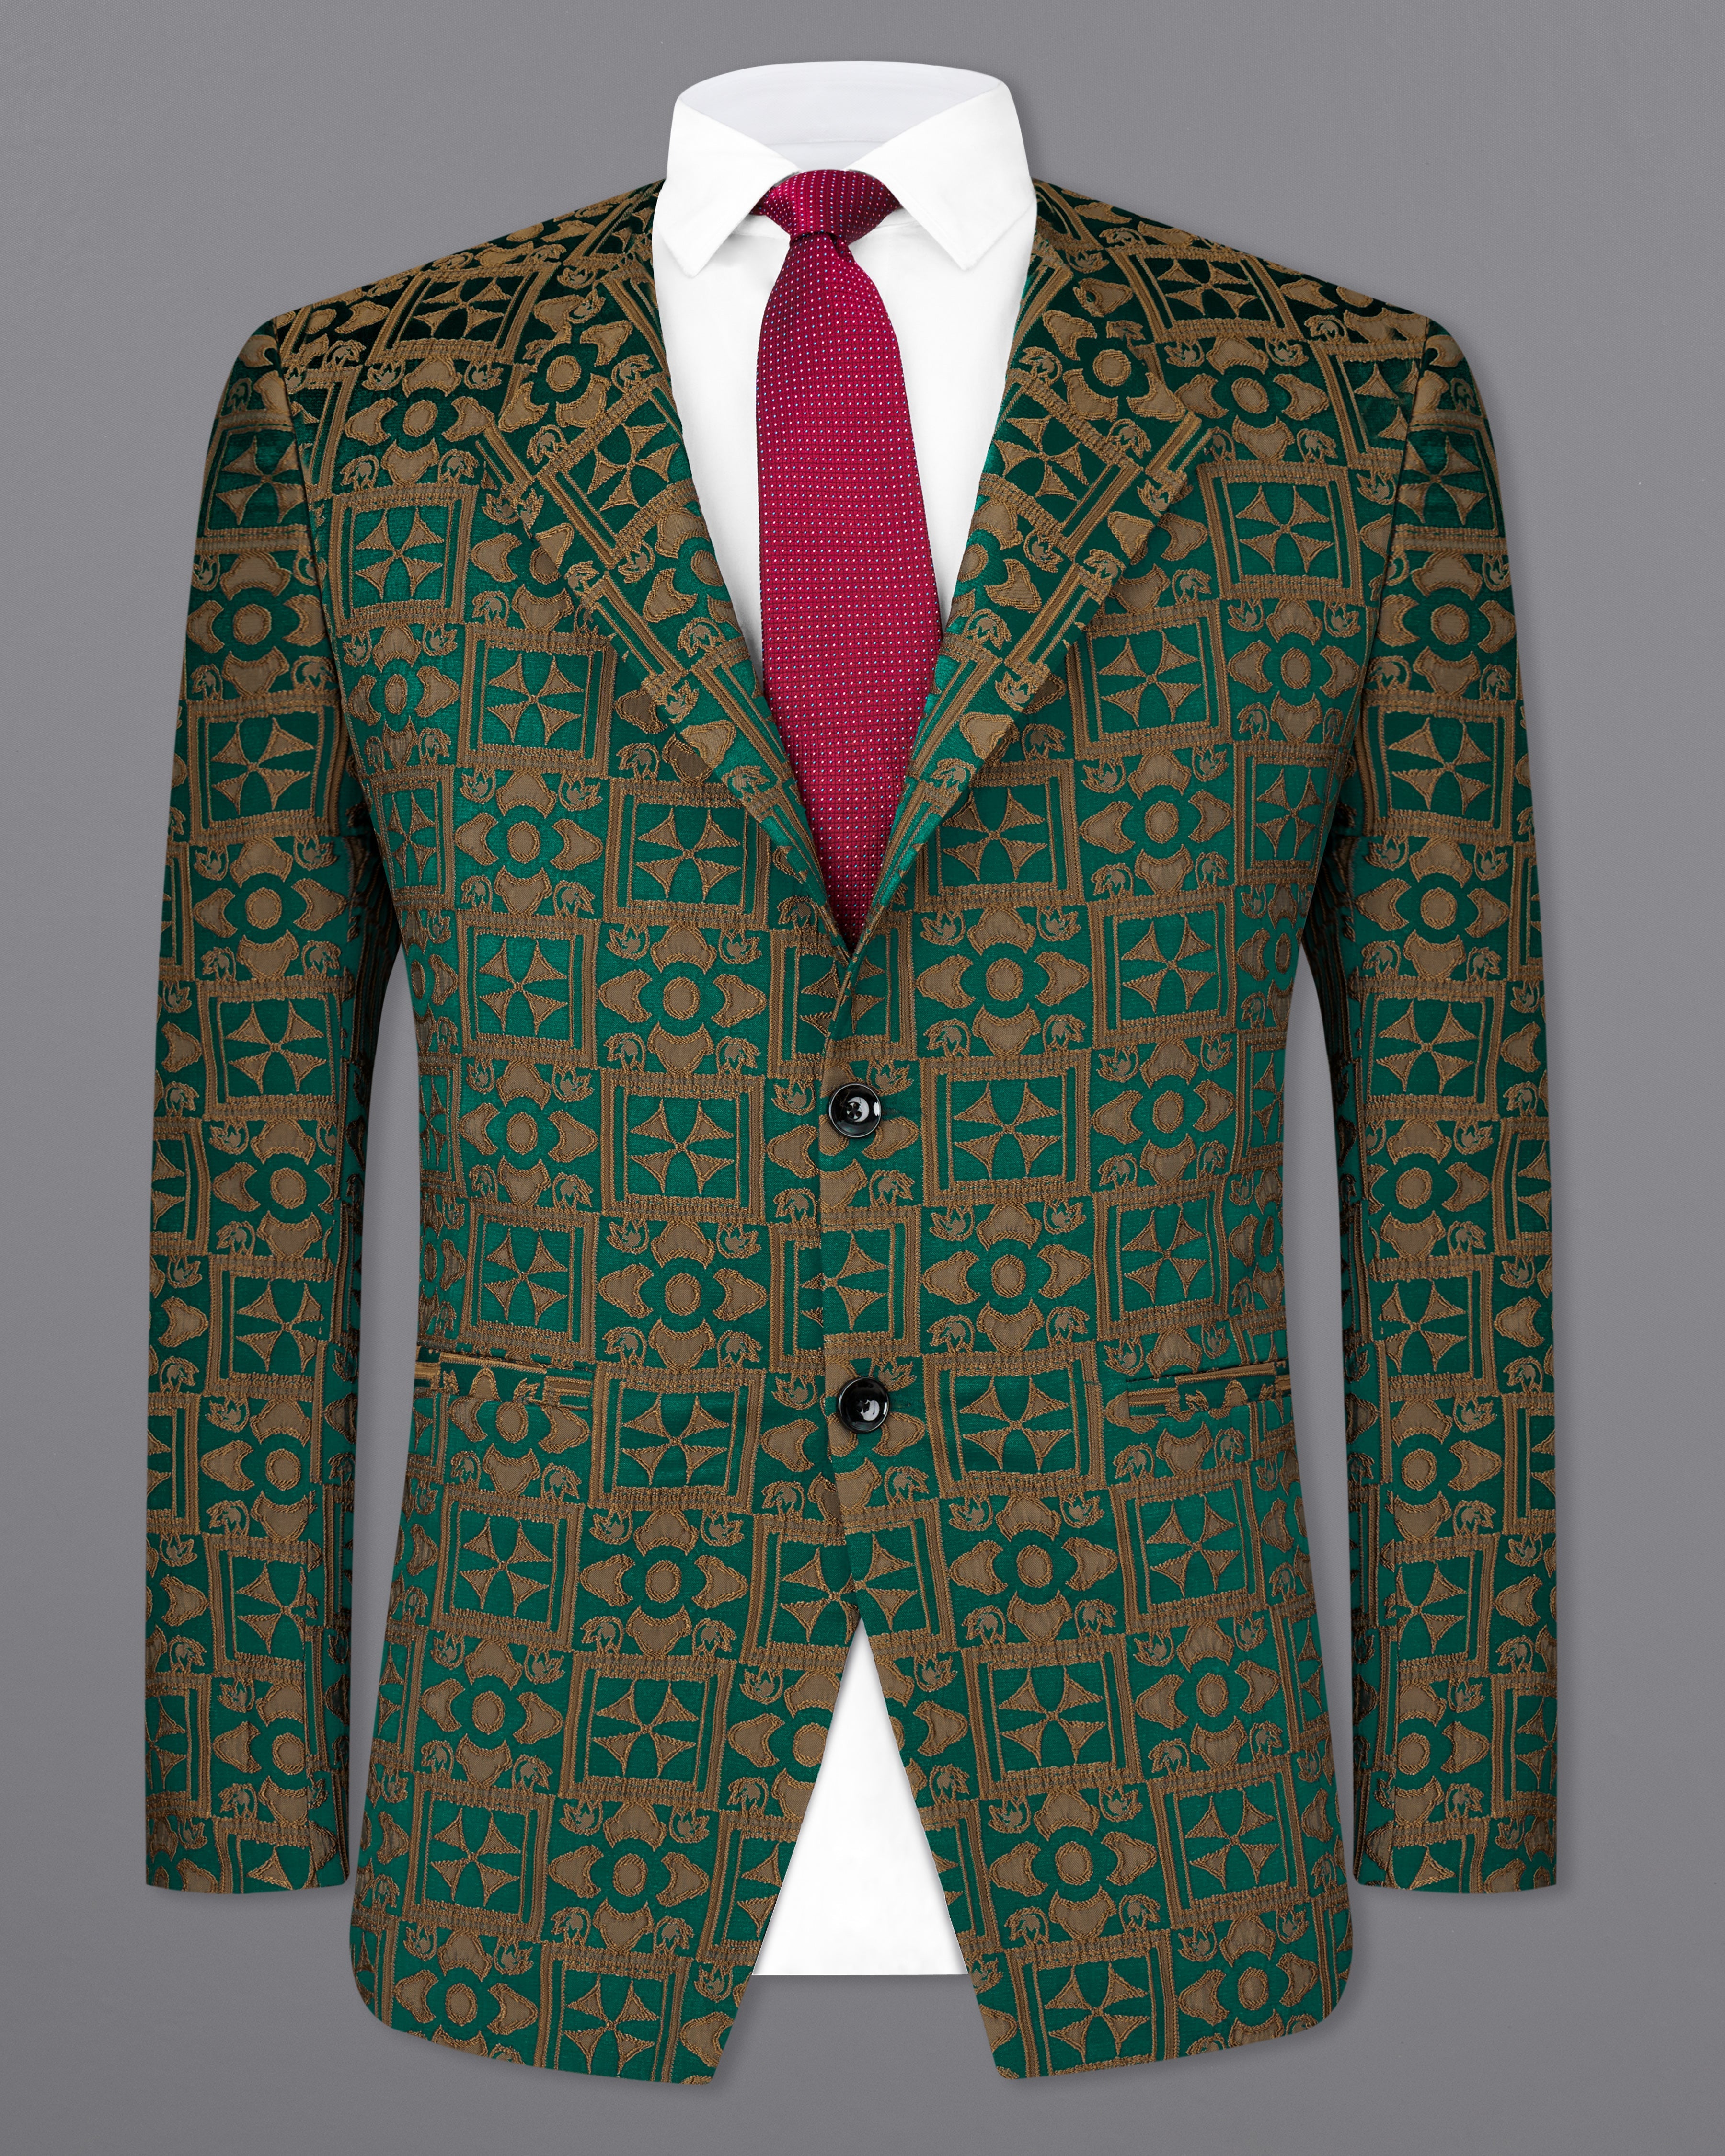 Everglade Green with Millbrook Brown Embroidered Blazer BL2355-SB-36, BL2355-SB-38, BL2355-SB-40, BL2355-SB-42, BL2355-SB-44, BL2355-SB-46, BL2355-SB-48, BL2355-SB-50, BL2355-SB-52, BL2355-SB-54, BL2355-SB-56, BL2355-SB-58, BL2355-SB-60